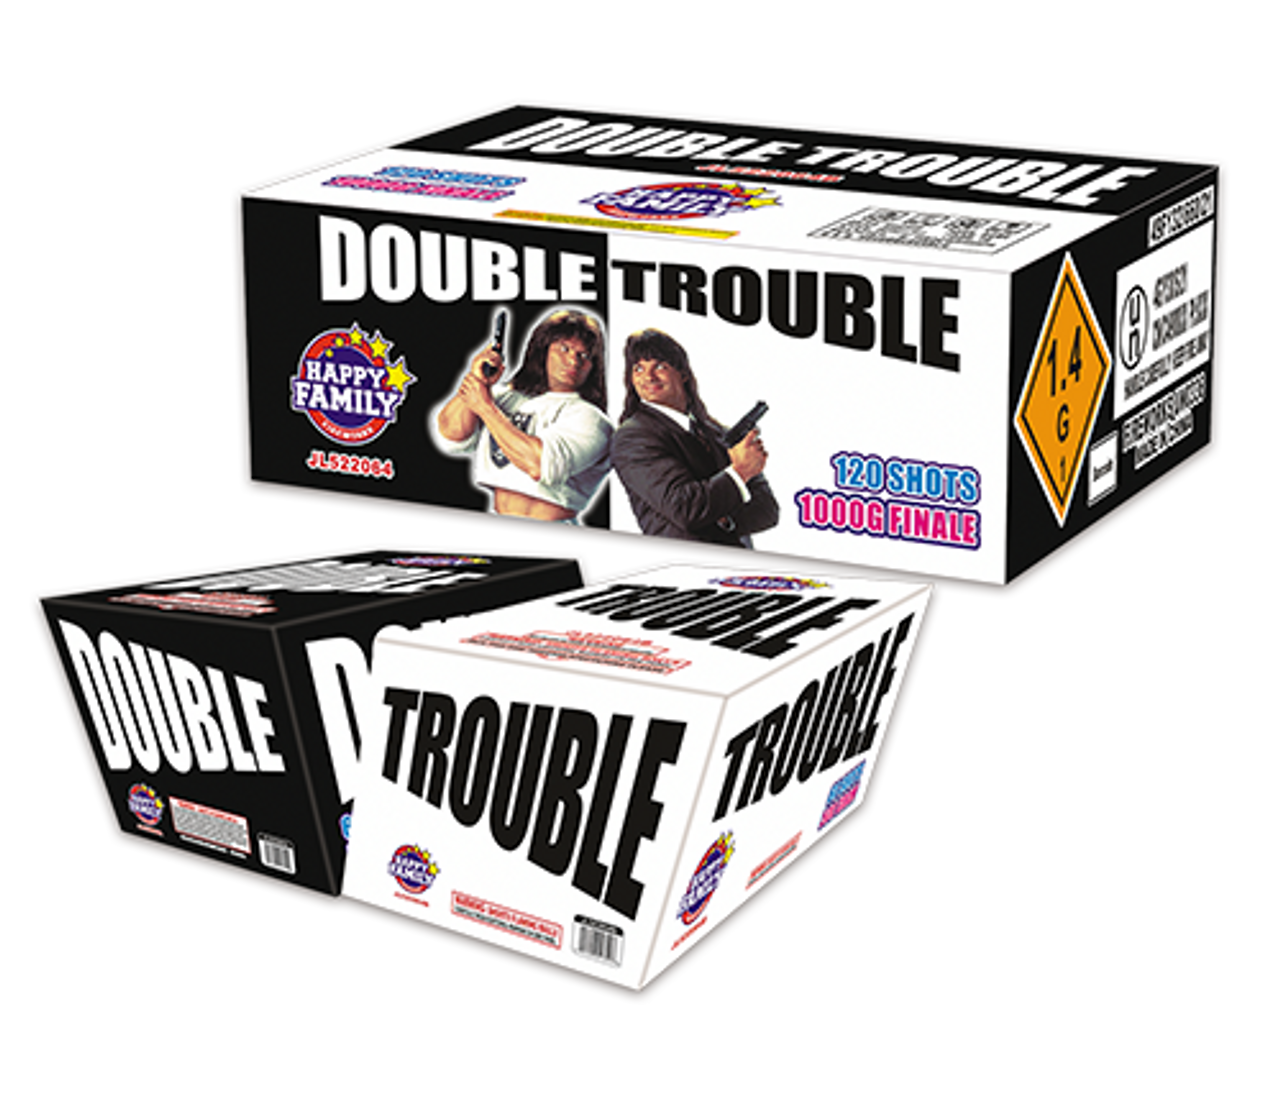 Double Trouble Assortment - American Wholesale Fireworks